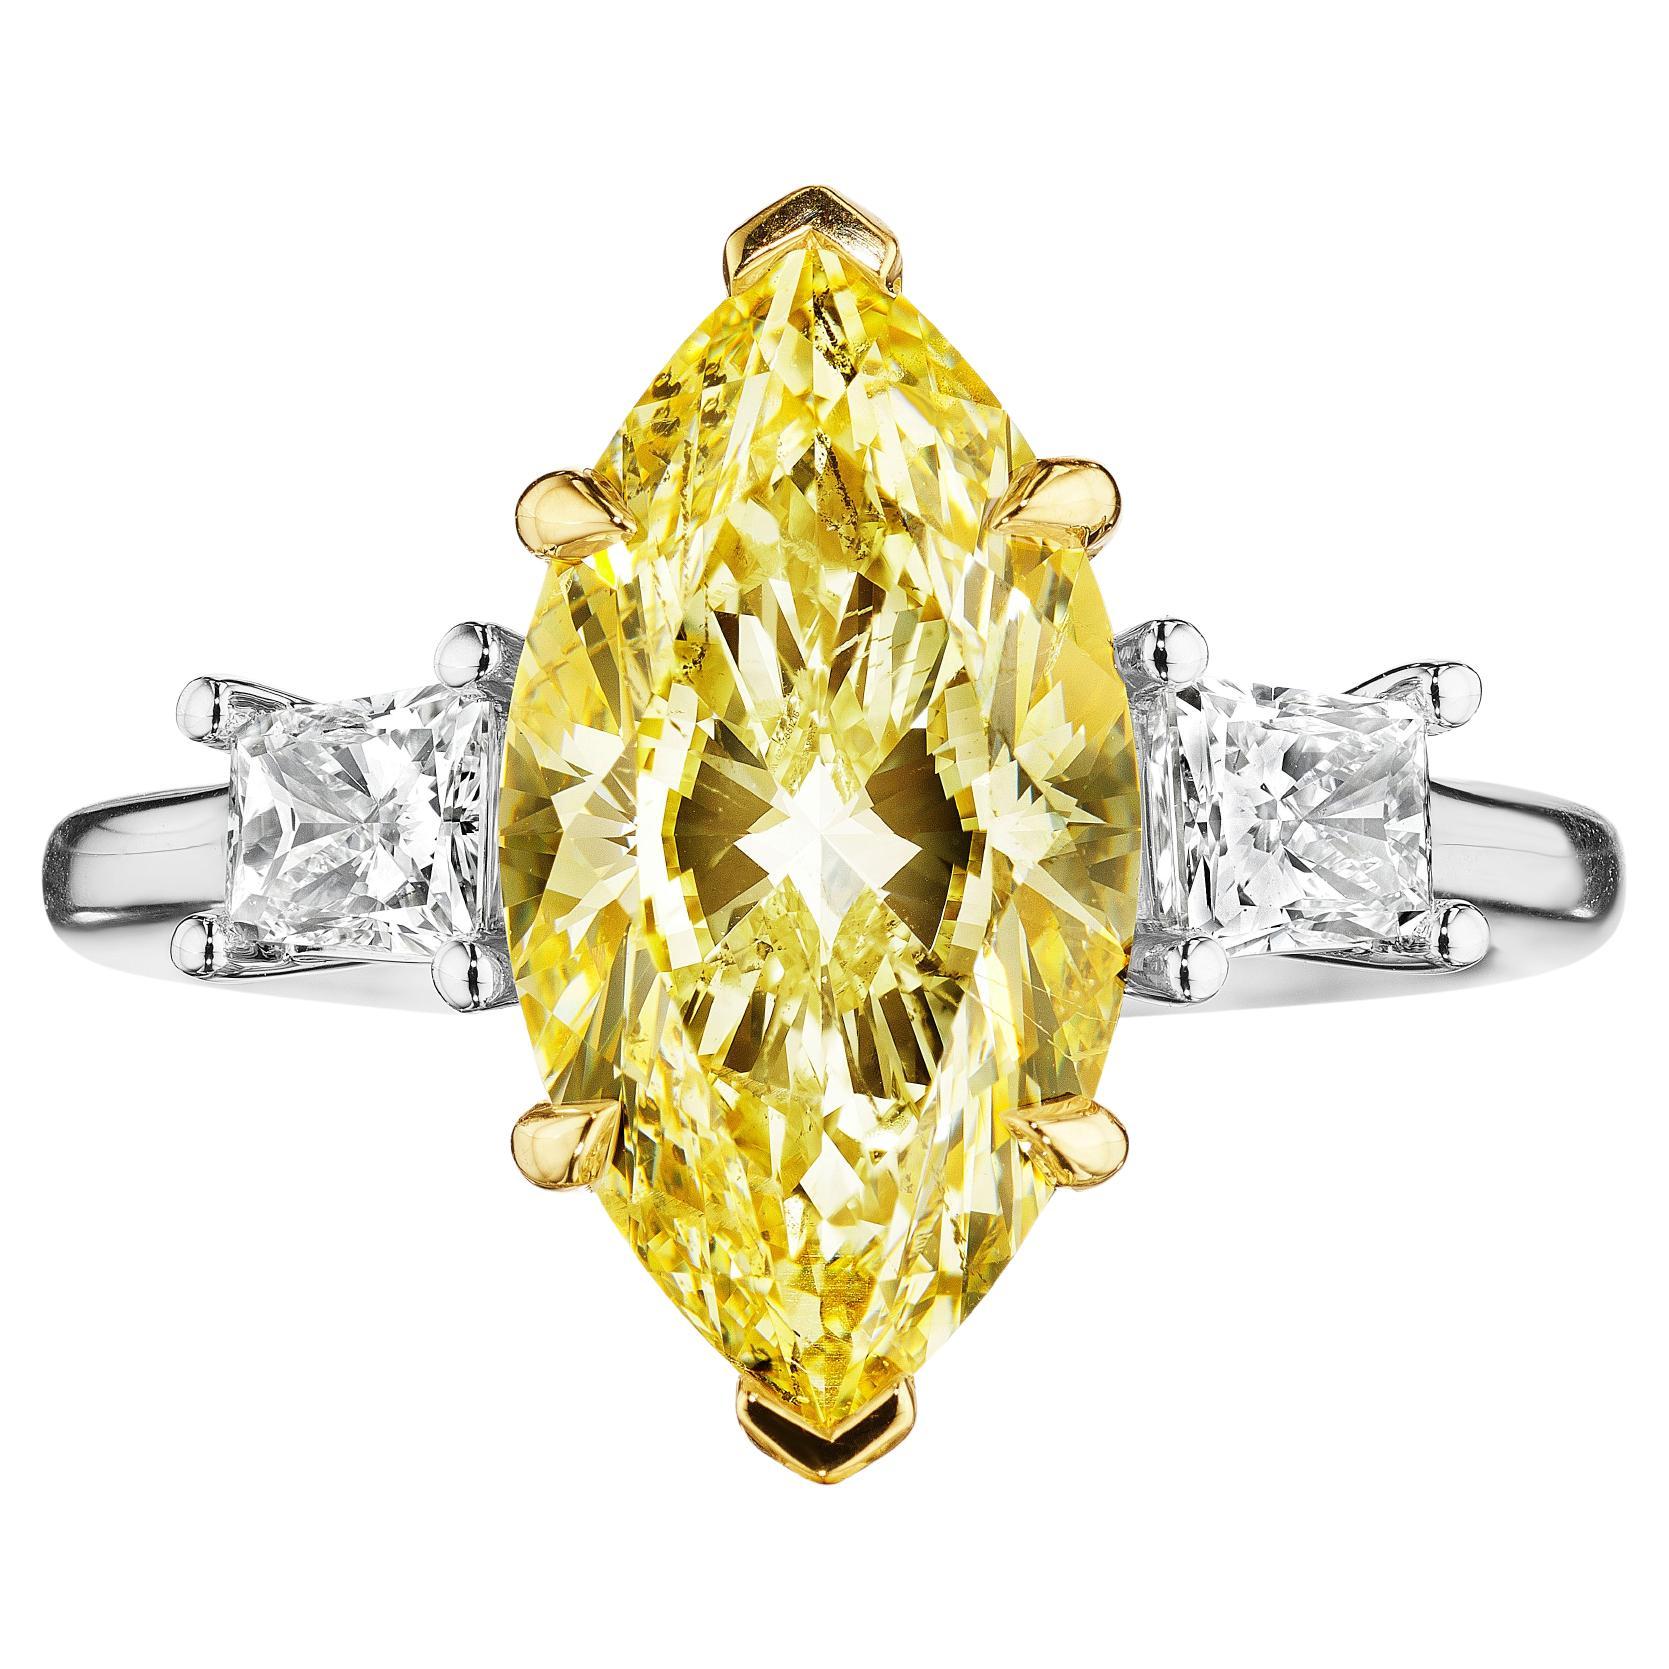 3.52ct GIA Certified Fancy Light Yellow Marquise & Tapered Baguette Diamond Ring